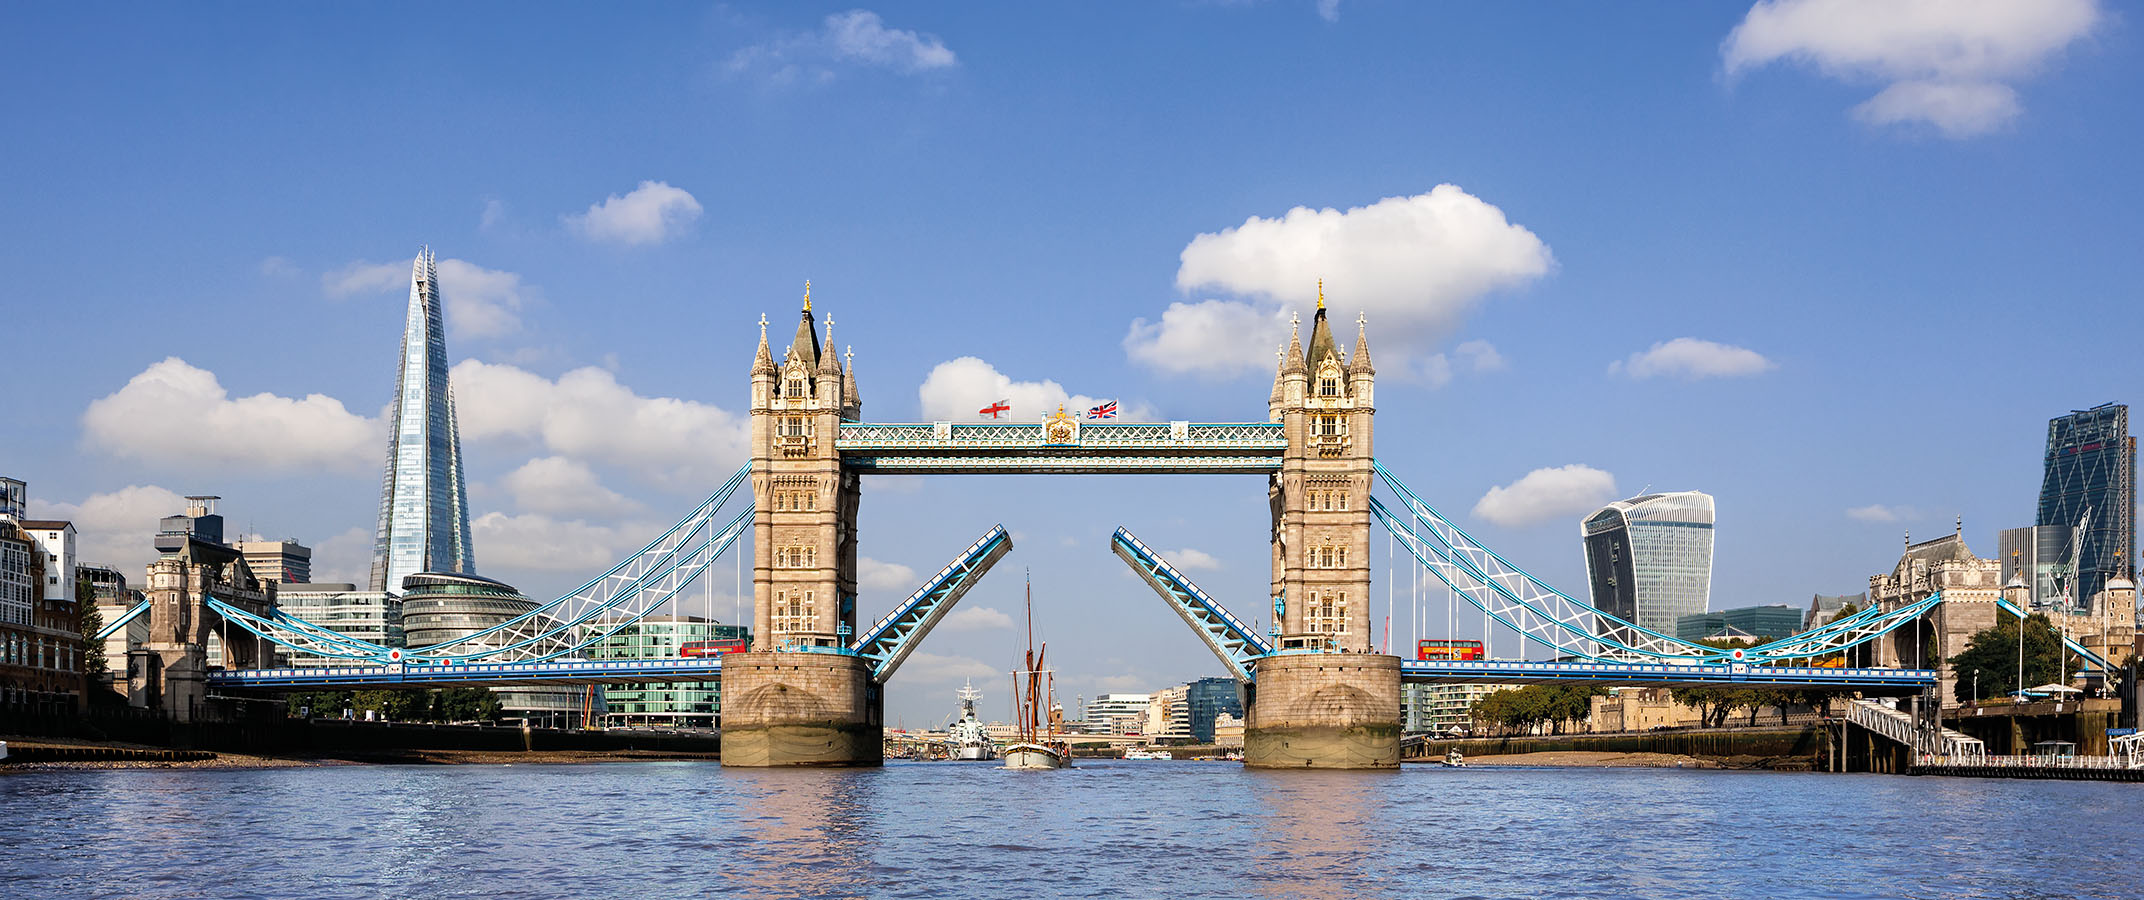 London's iconic bridge still opens 850 times a year, 130 years after construction. This image is The Tower's official current bridge lift image used in many mediaClient: Baizdon / City of London Corporation